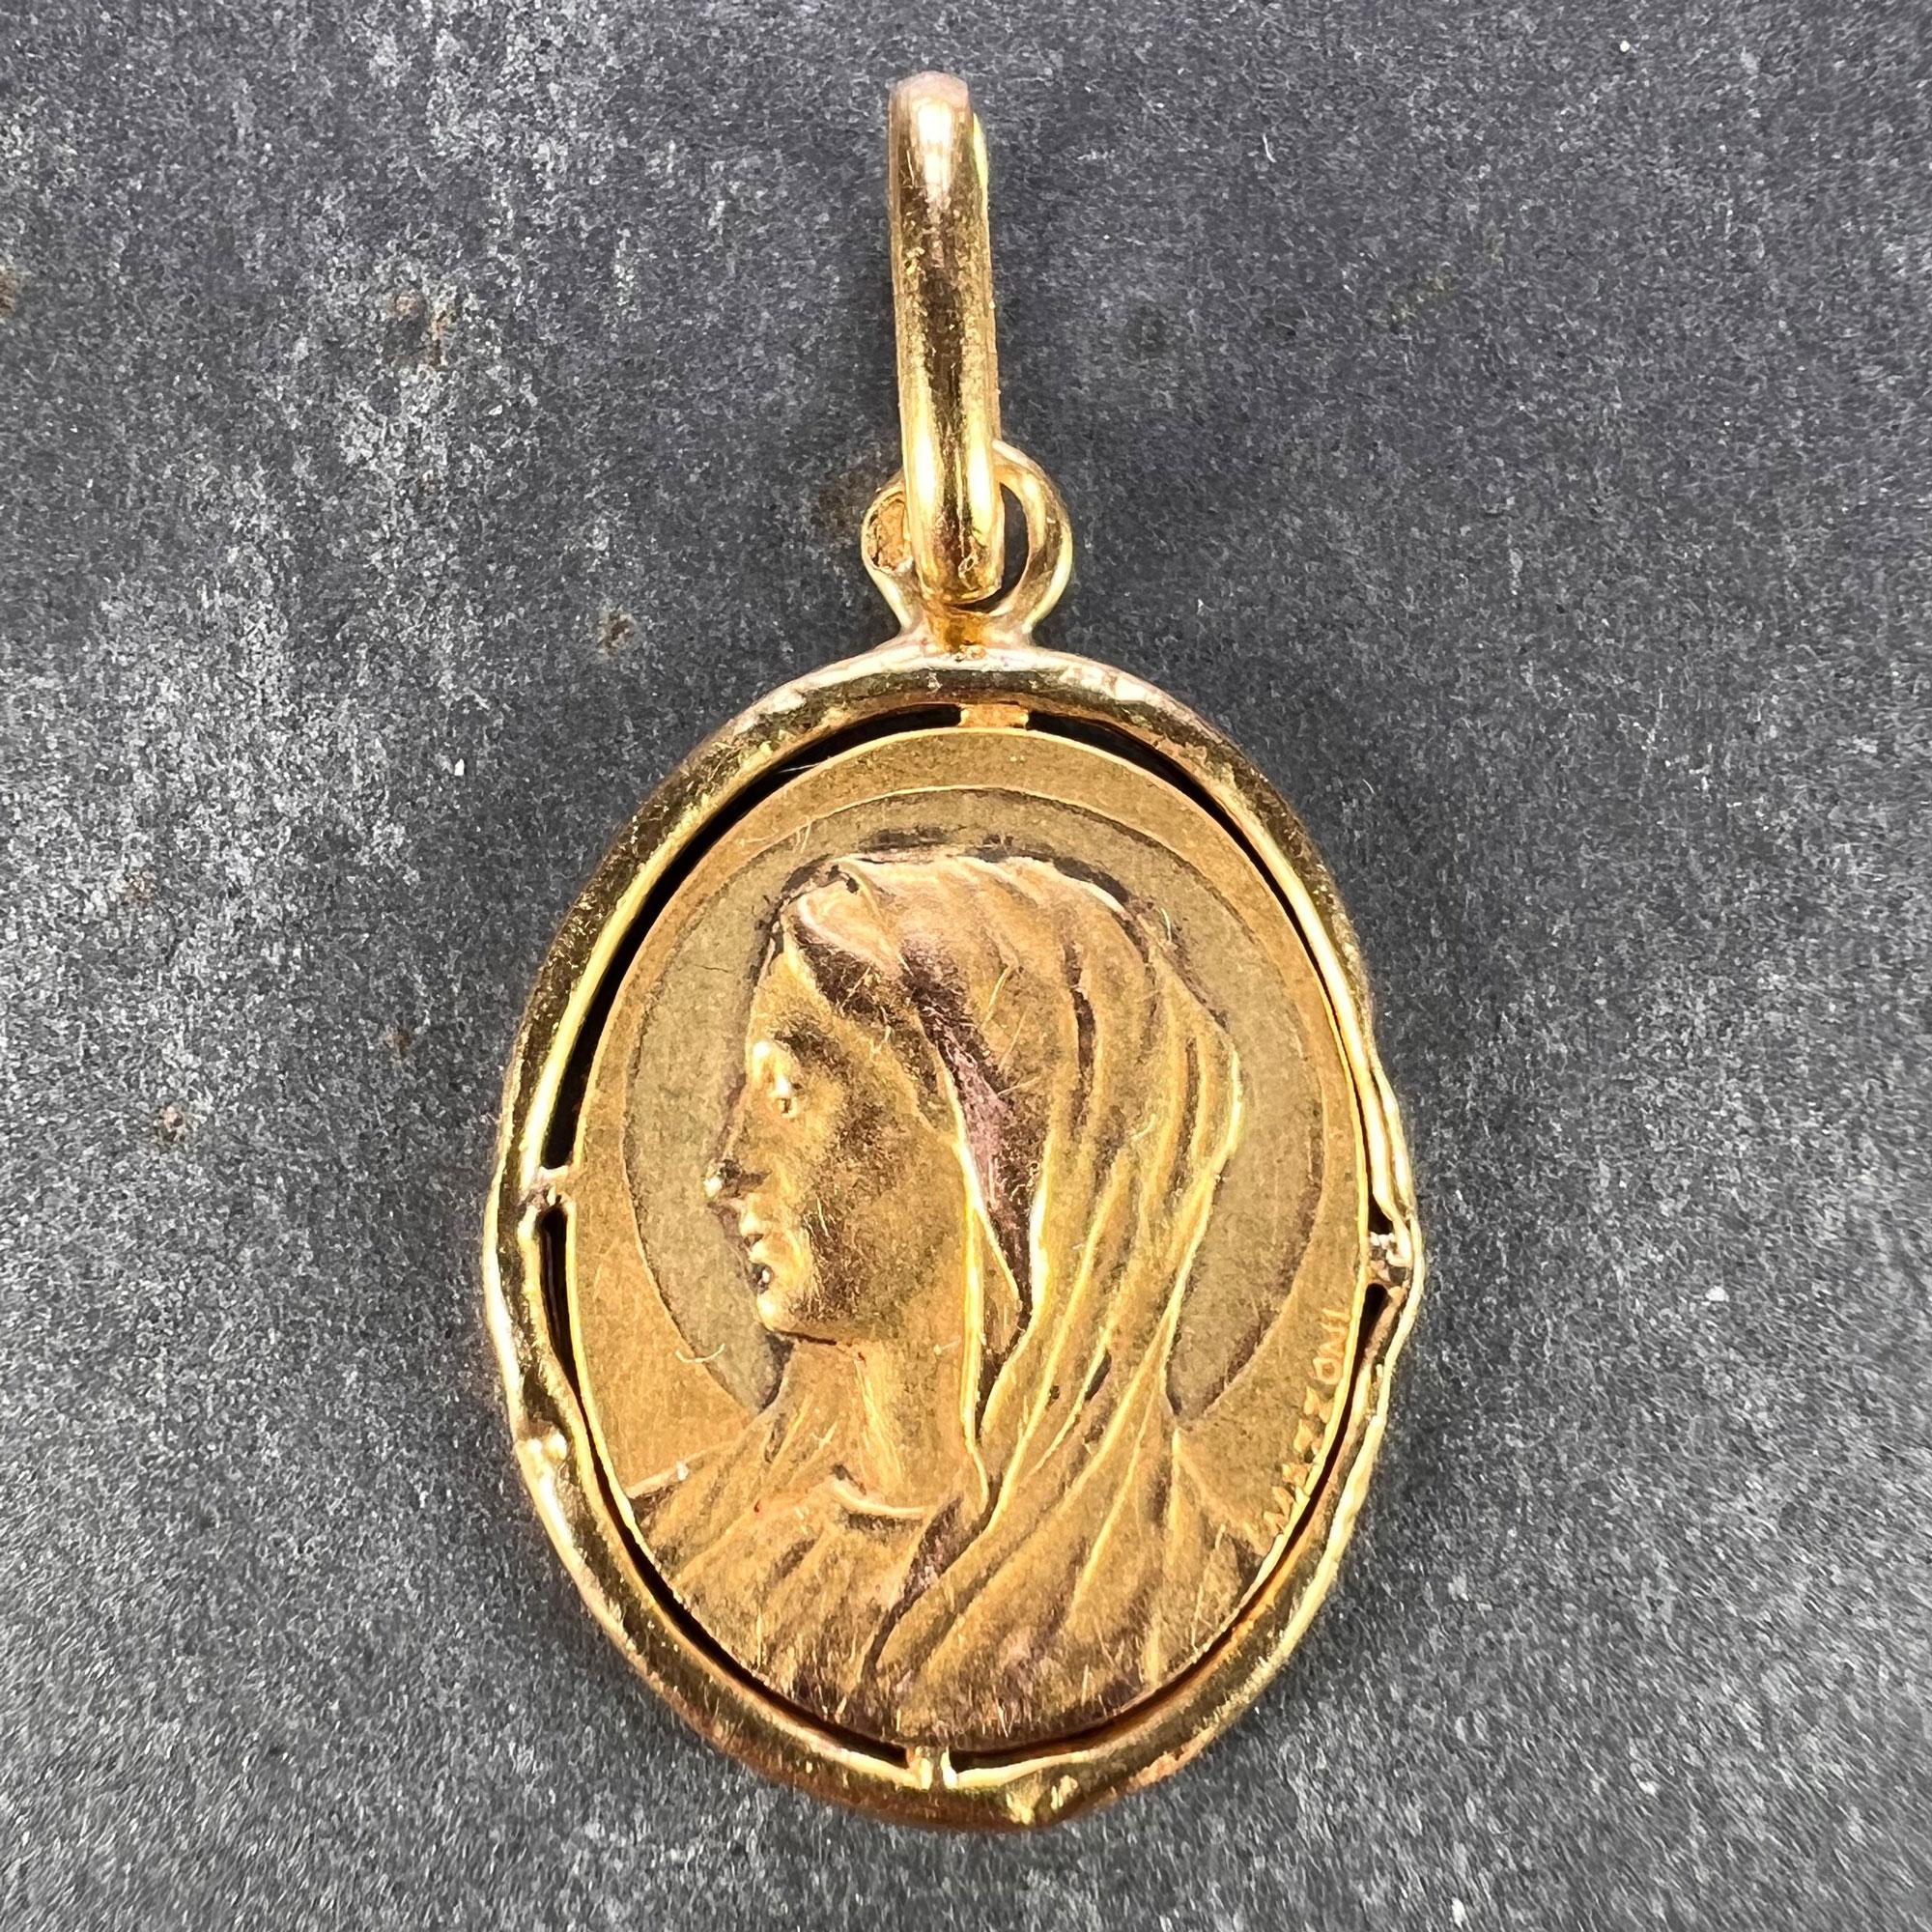 A French 18 karat (18K) yellow gold charm pendant designed as an oval medal depicting the Virgin Mary, signed Mazzoni. Engraved to the reverse with a monogram AJ / AF and dated 13 Janvier 1924. Stamped with the eagles head for French manufacture and